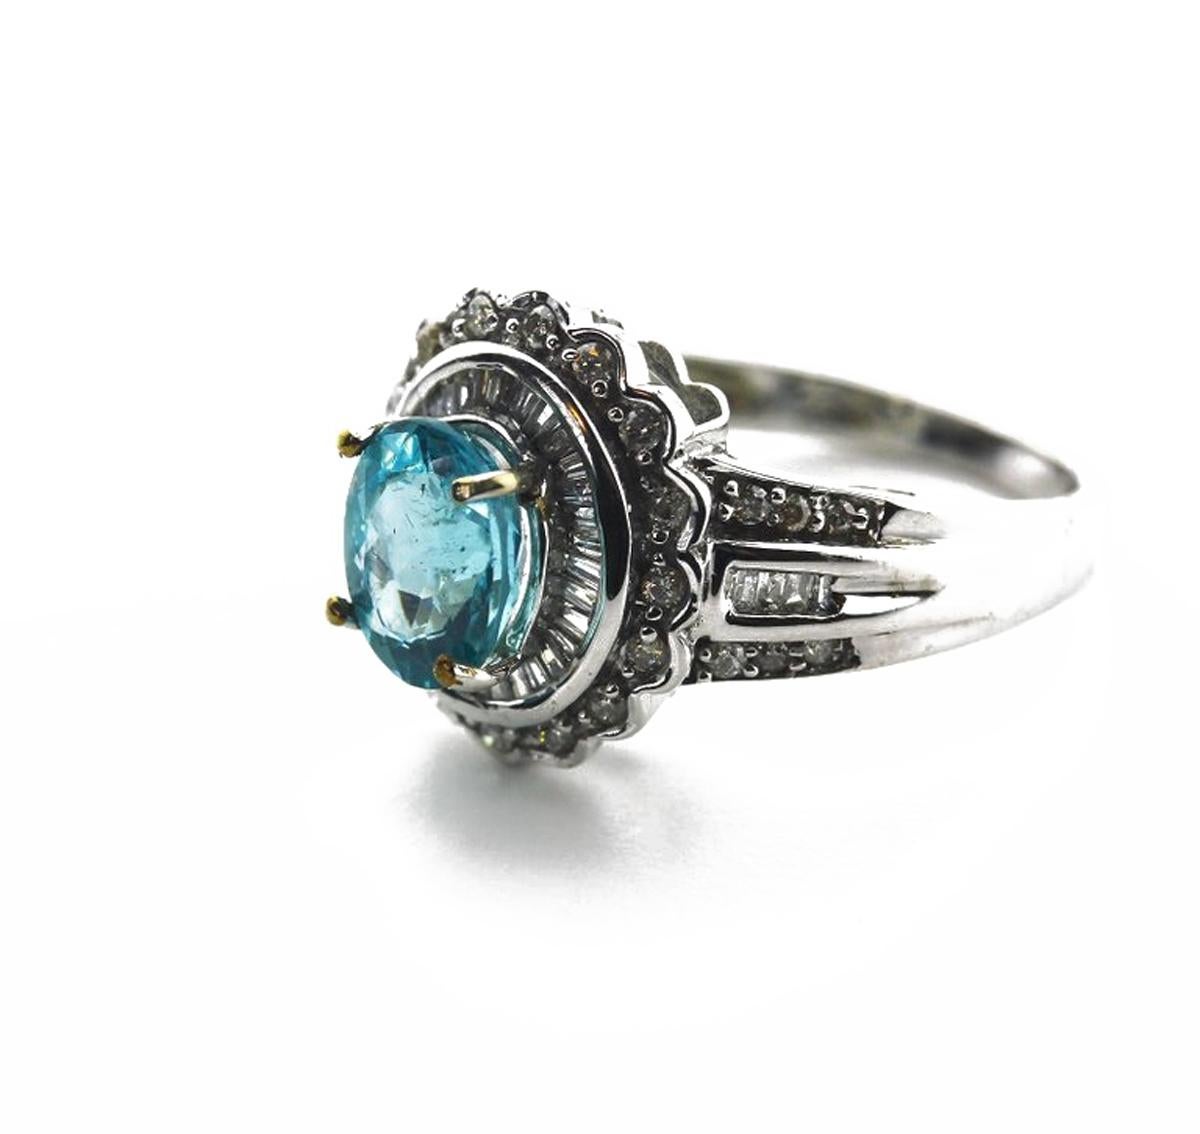 Glittering 1.3 Carat bright blue Apatite is enhanced with brilliant glittering little white Diamonds and set in a handmade unique 10KT white gold ring size 6 (sizable),  